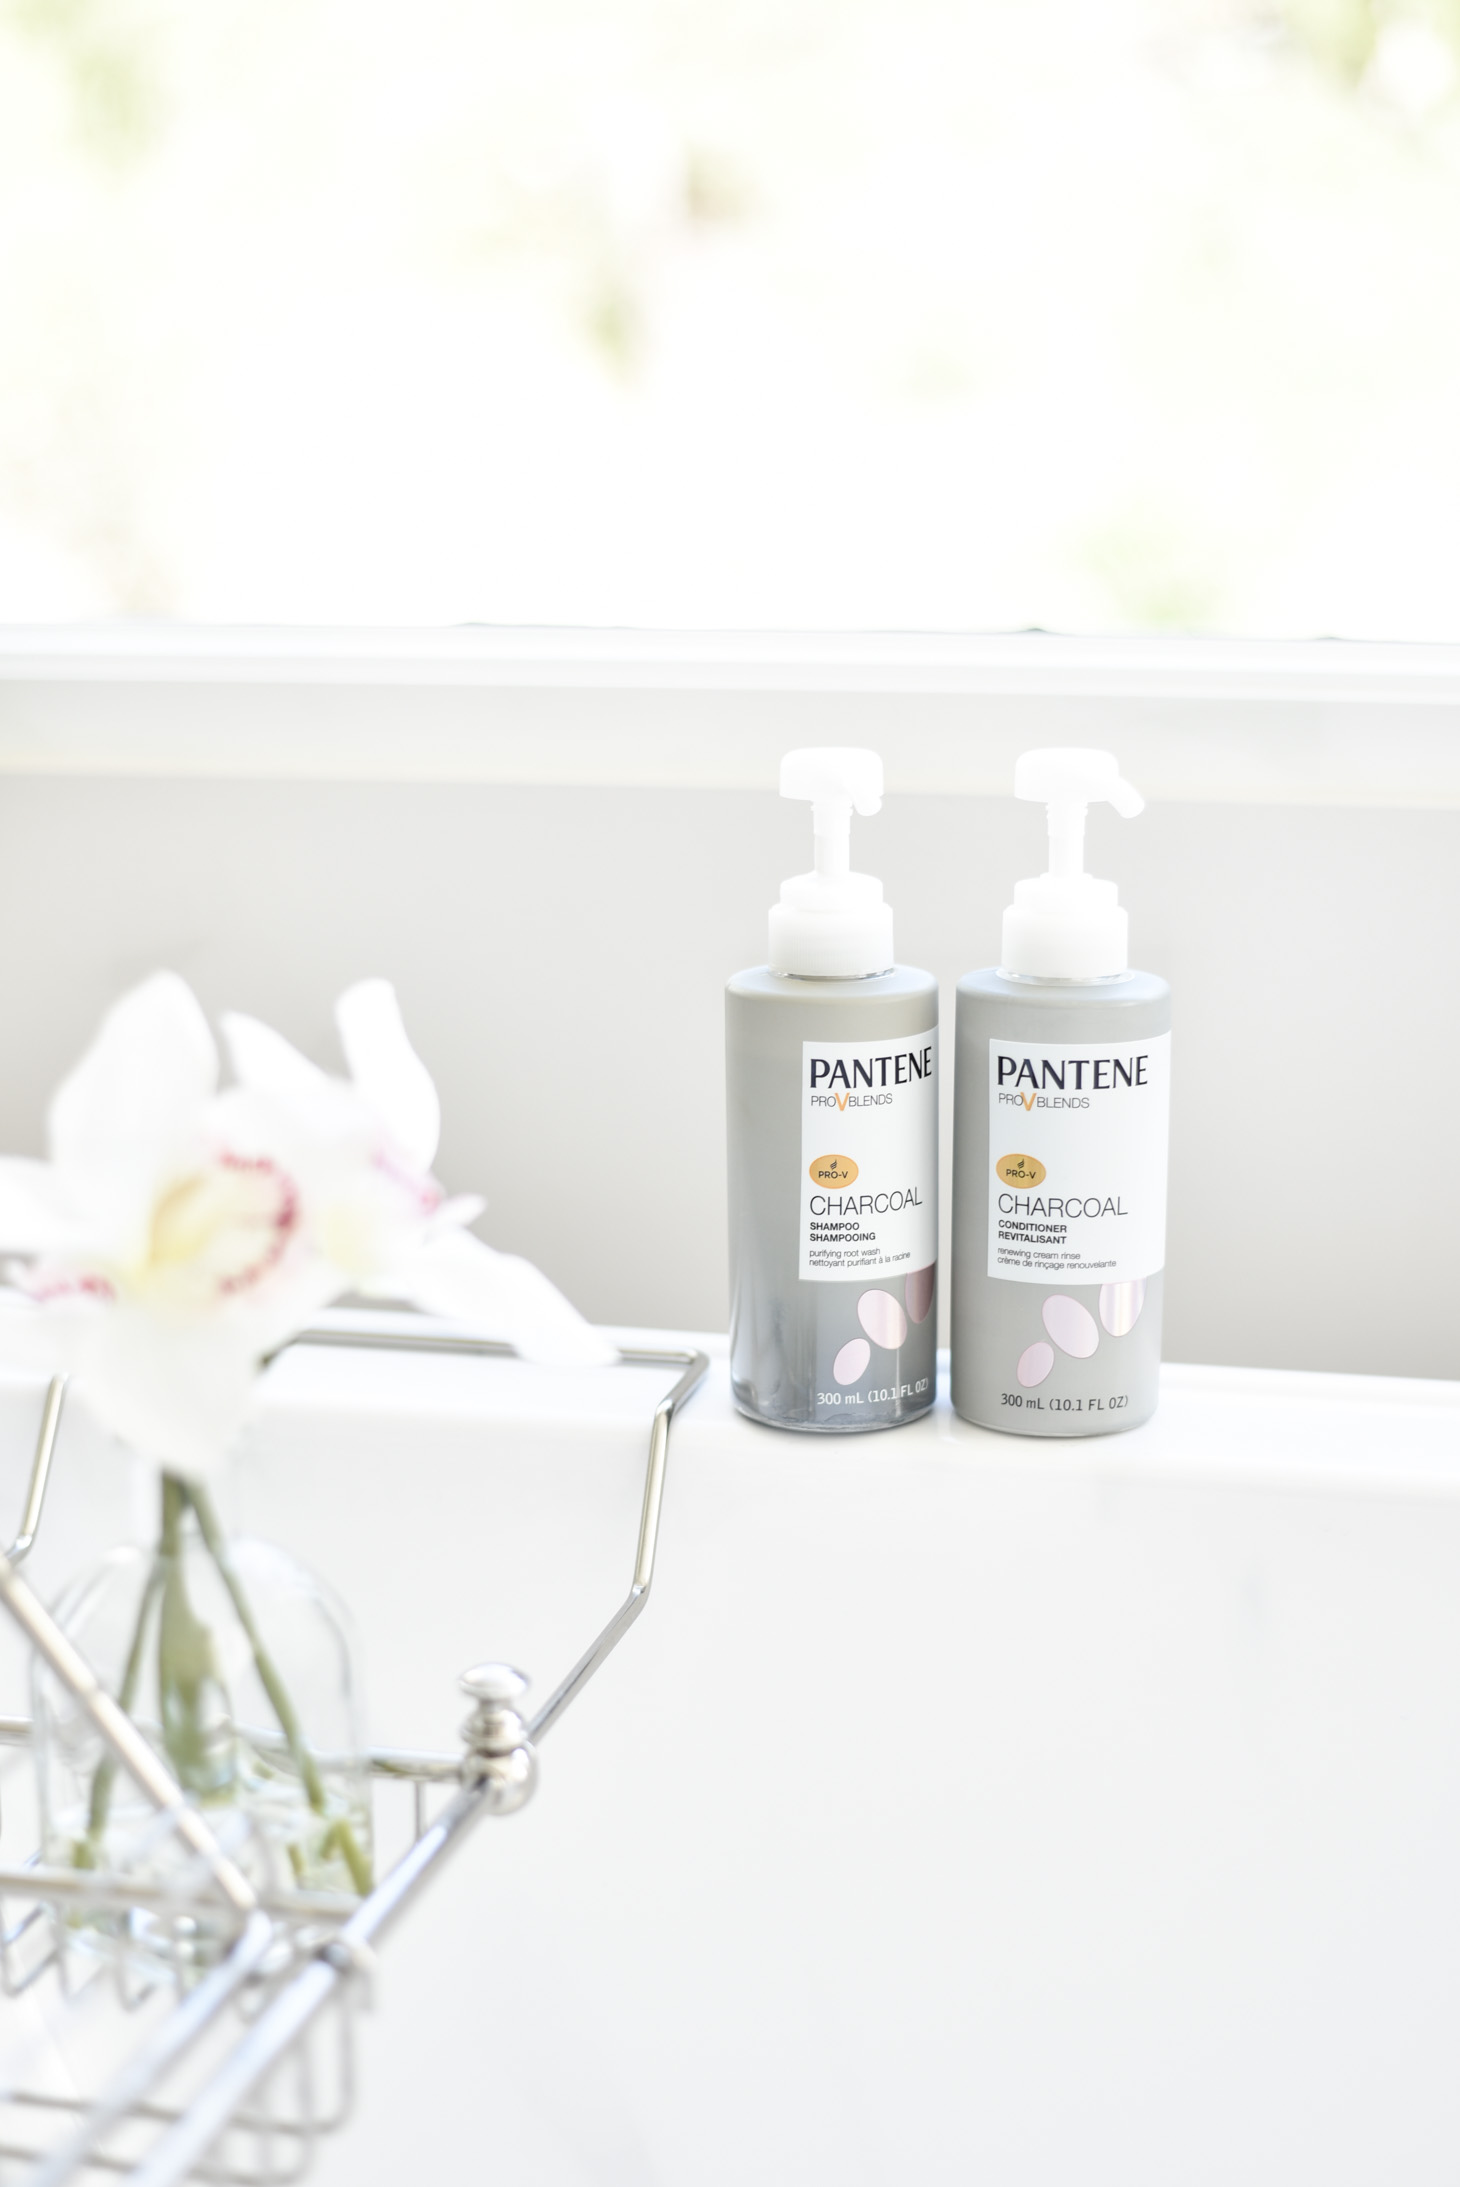 Erin Elizabeth of Wink and a Twirl shares the Pantene Charcoal Shampoo and Conditioner 